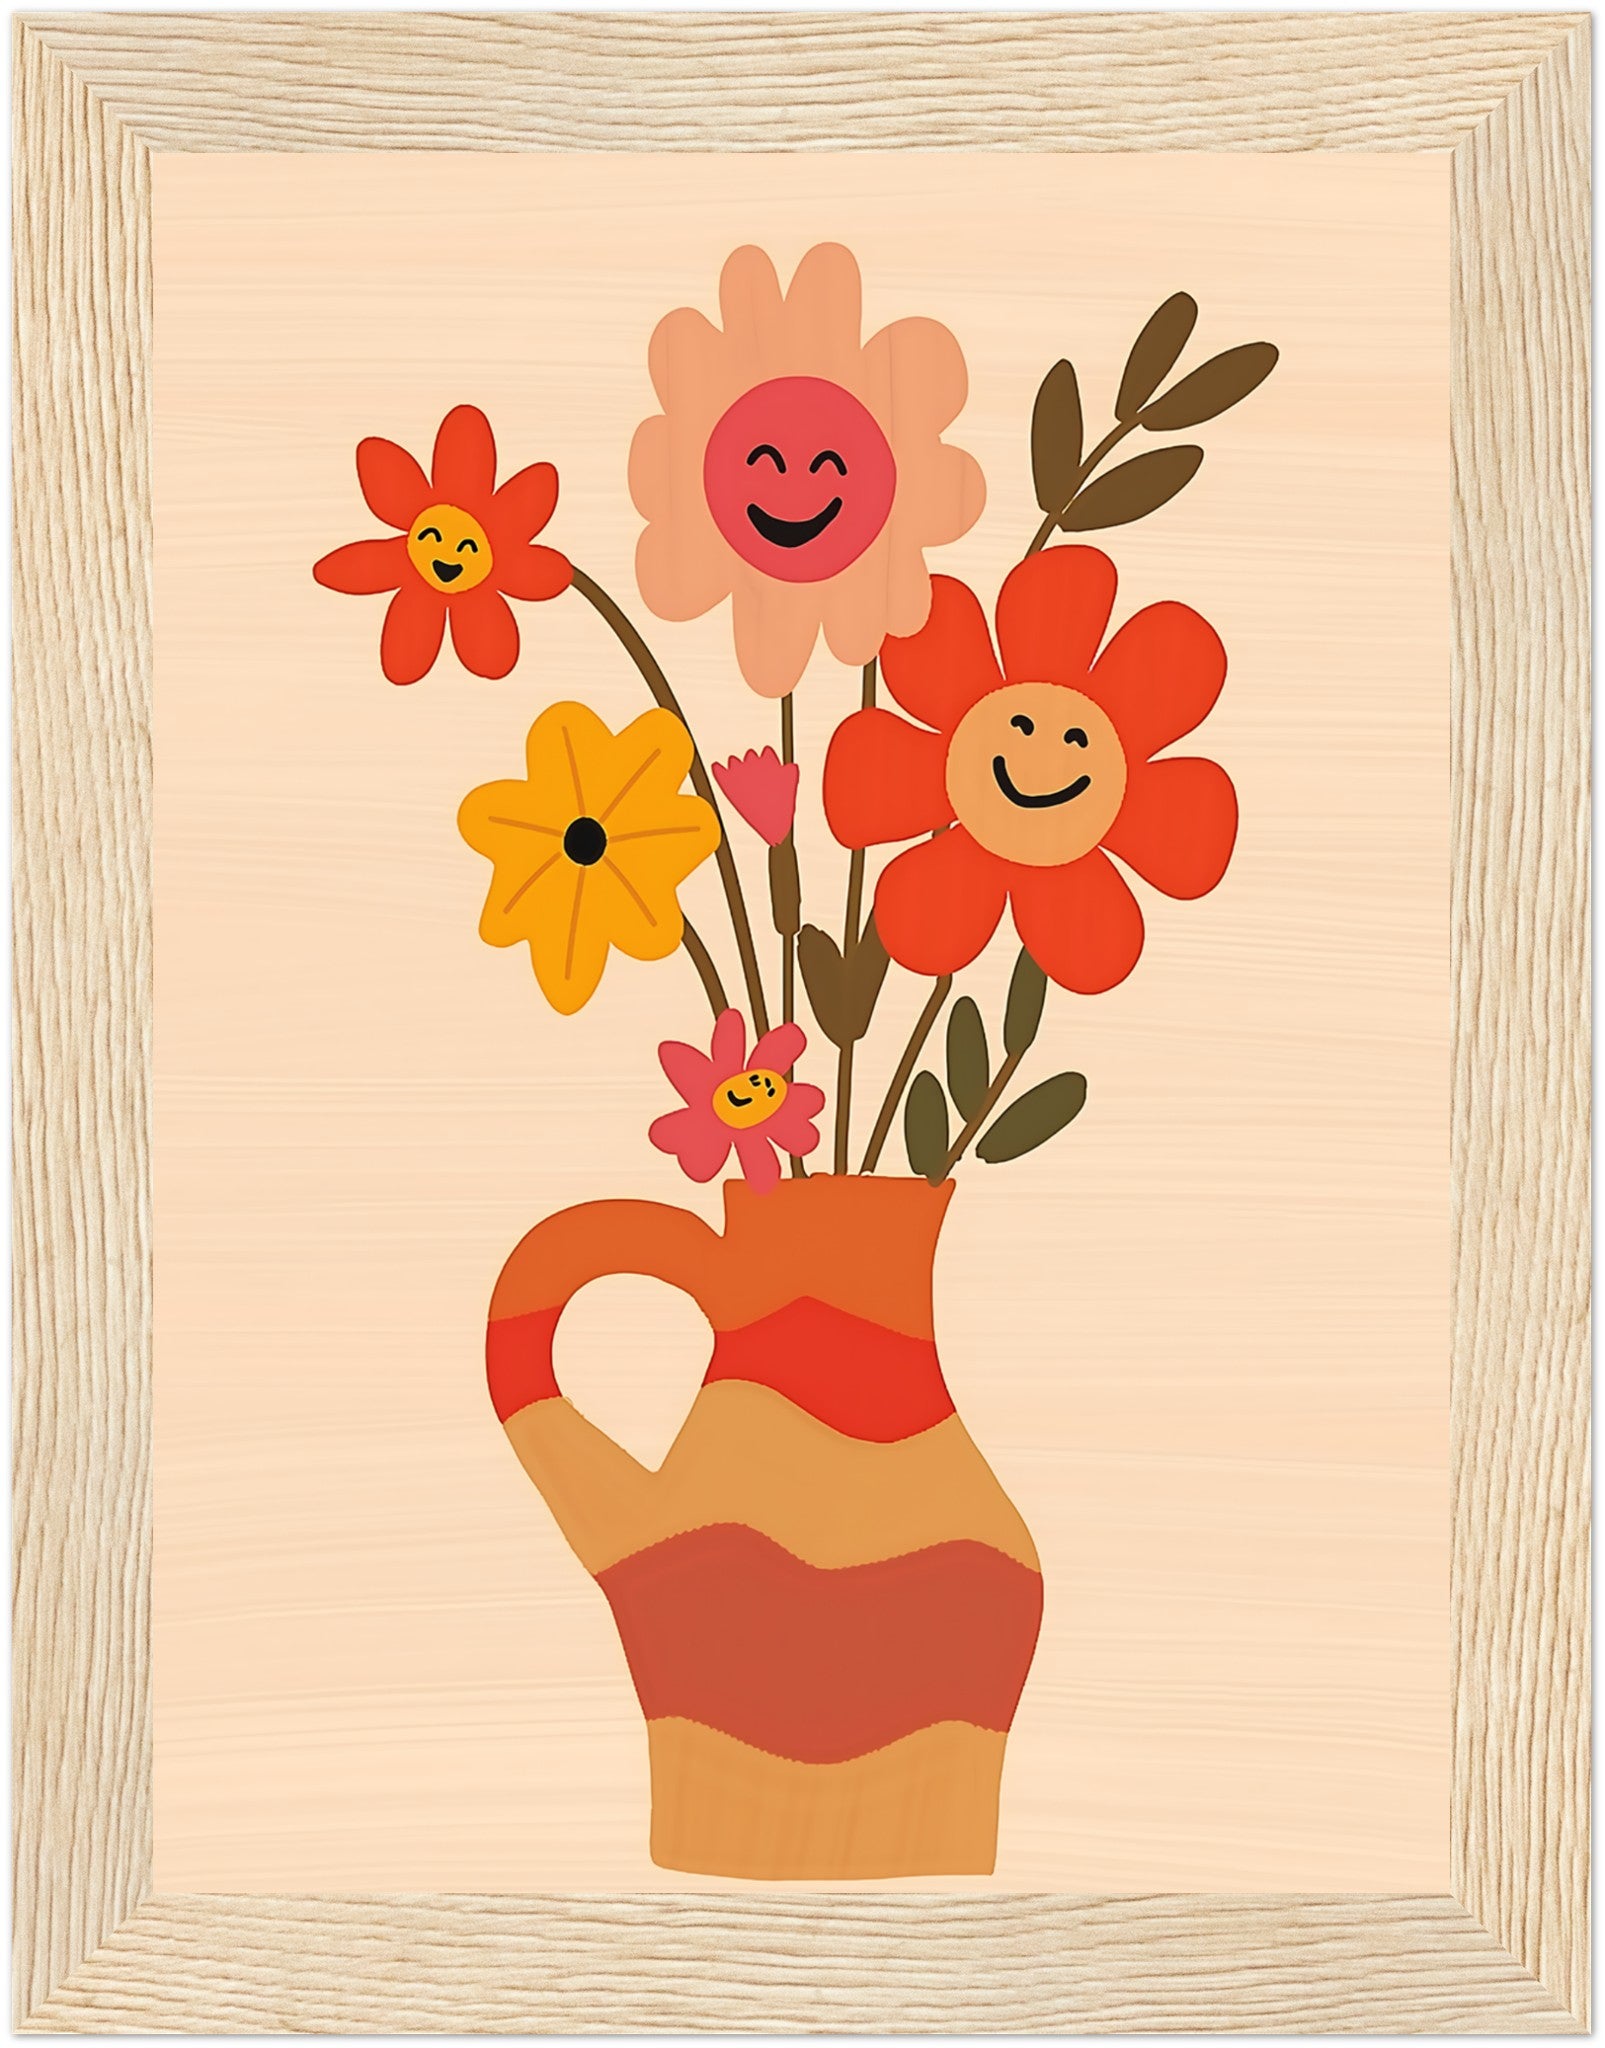 A framed illustration of a vase with smiling cartoon flowers.